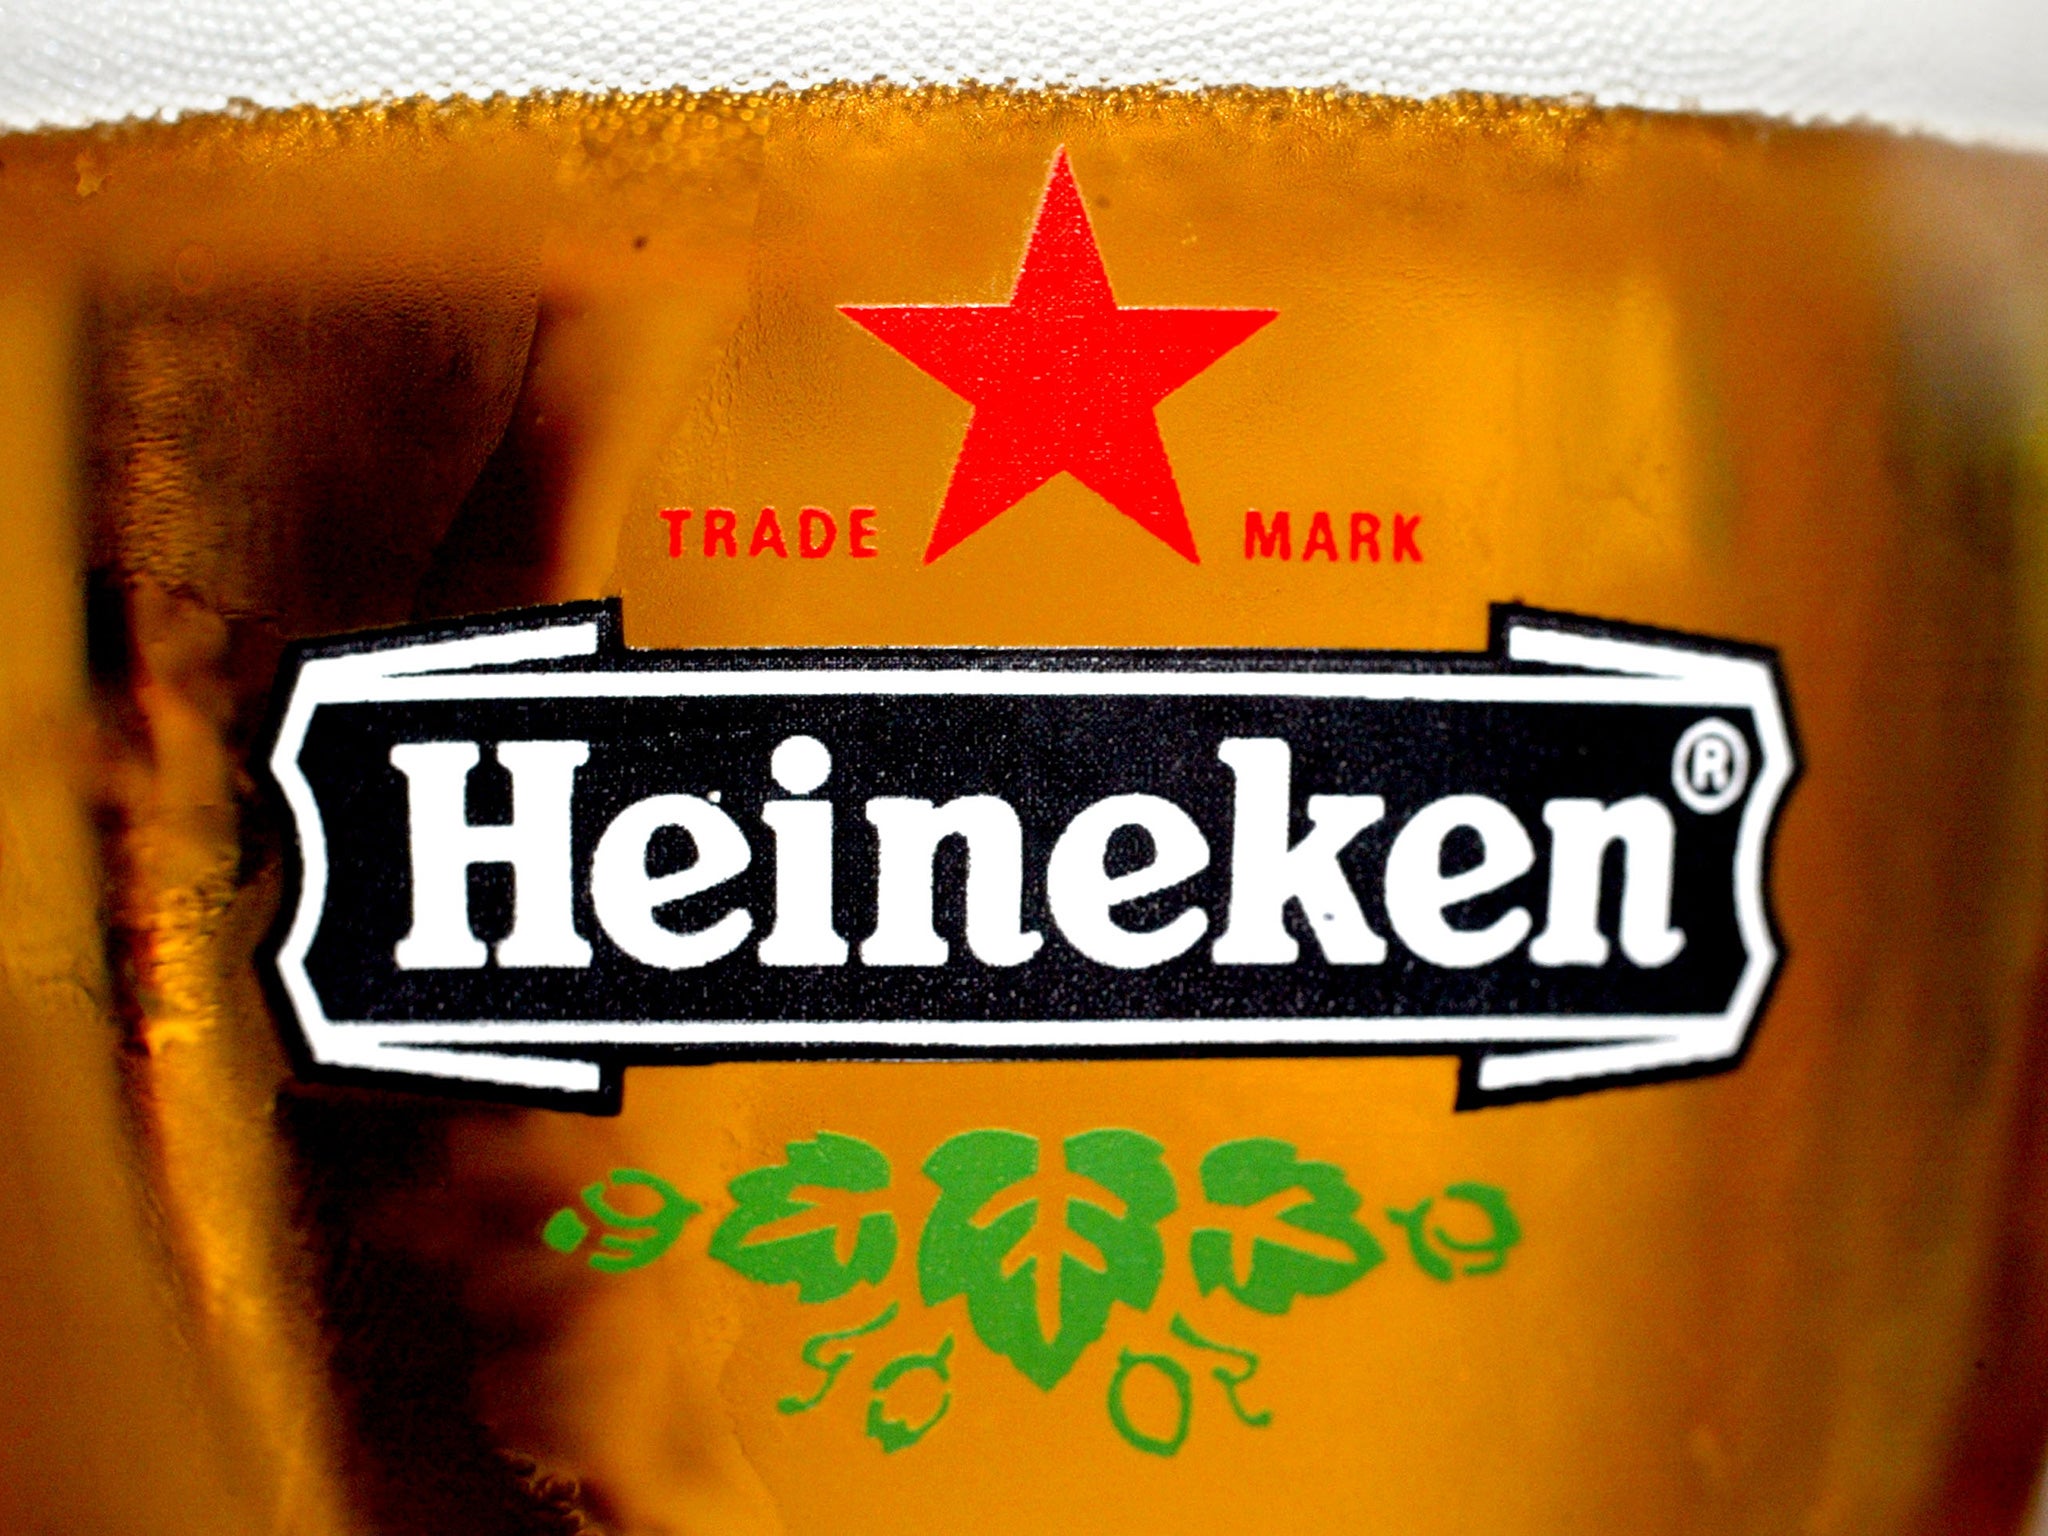 48,000 cans of Heineken were reportedly confiscated